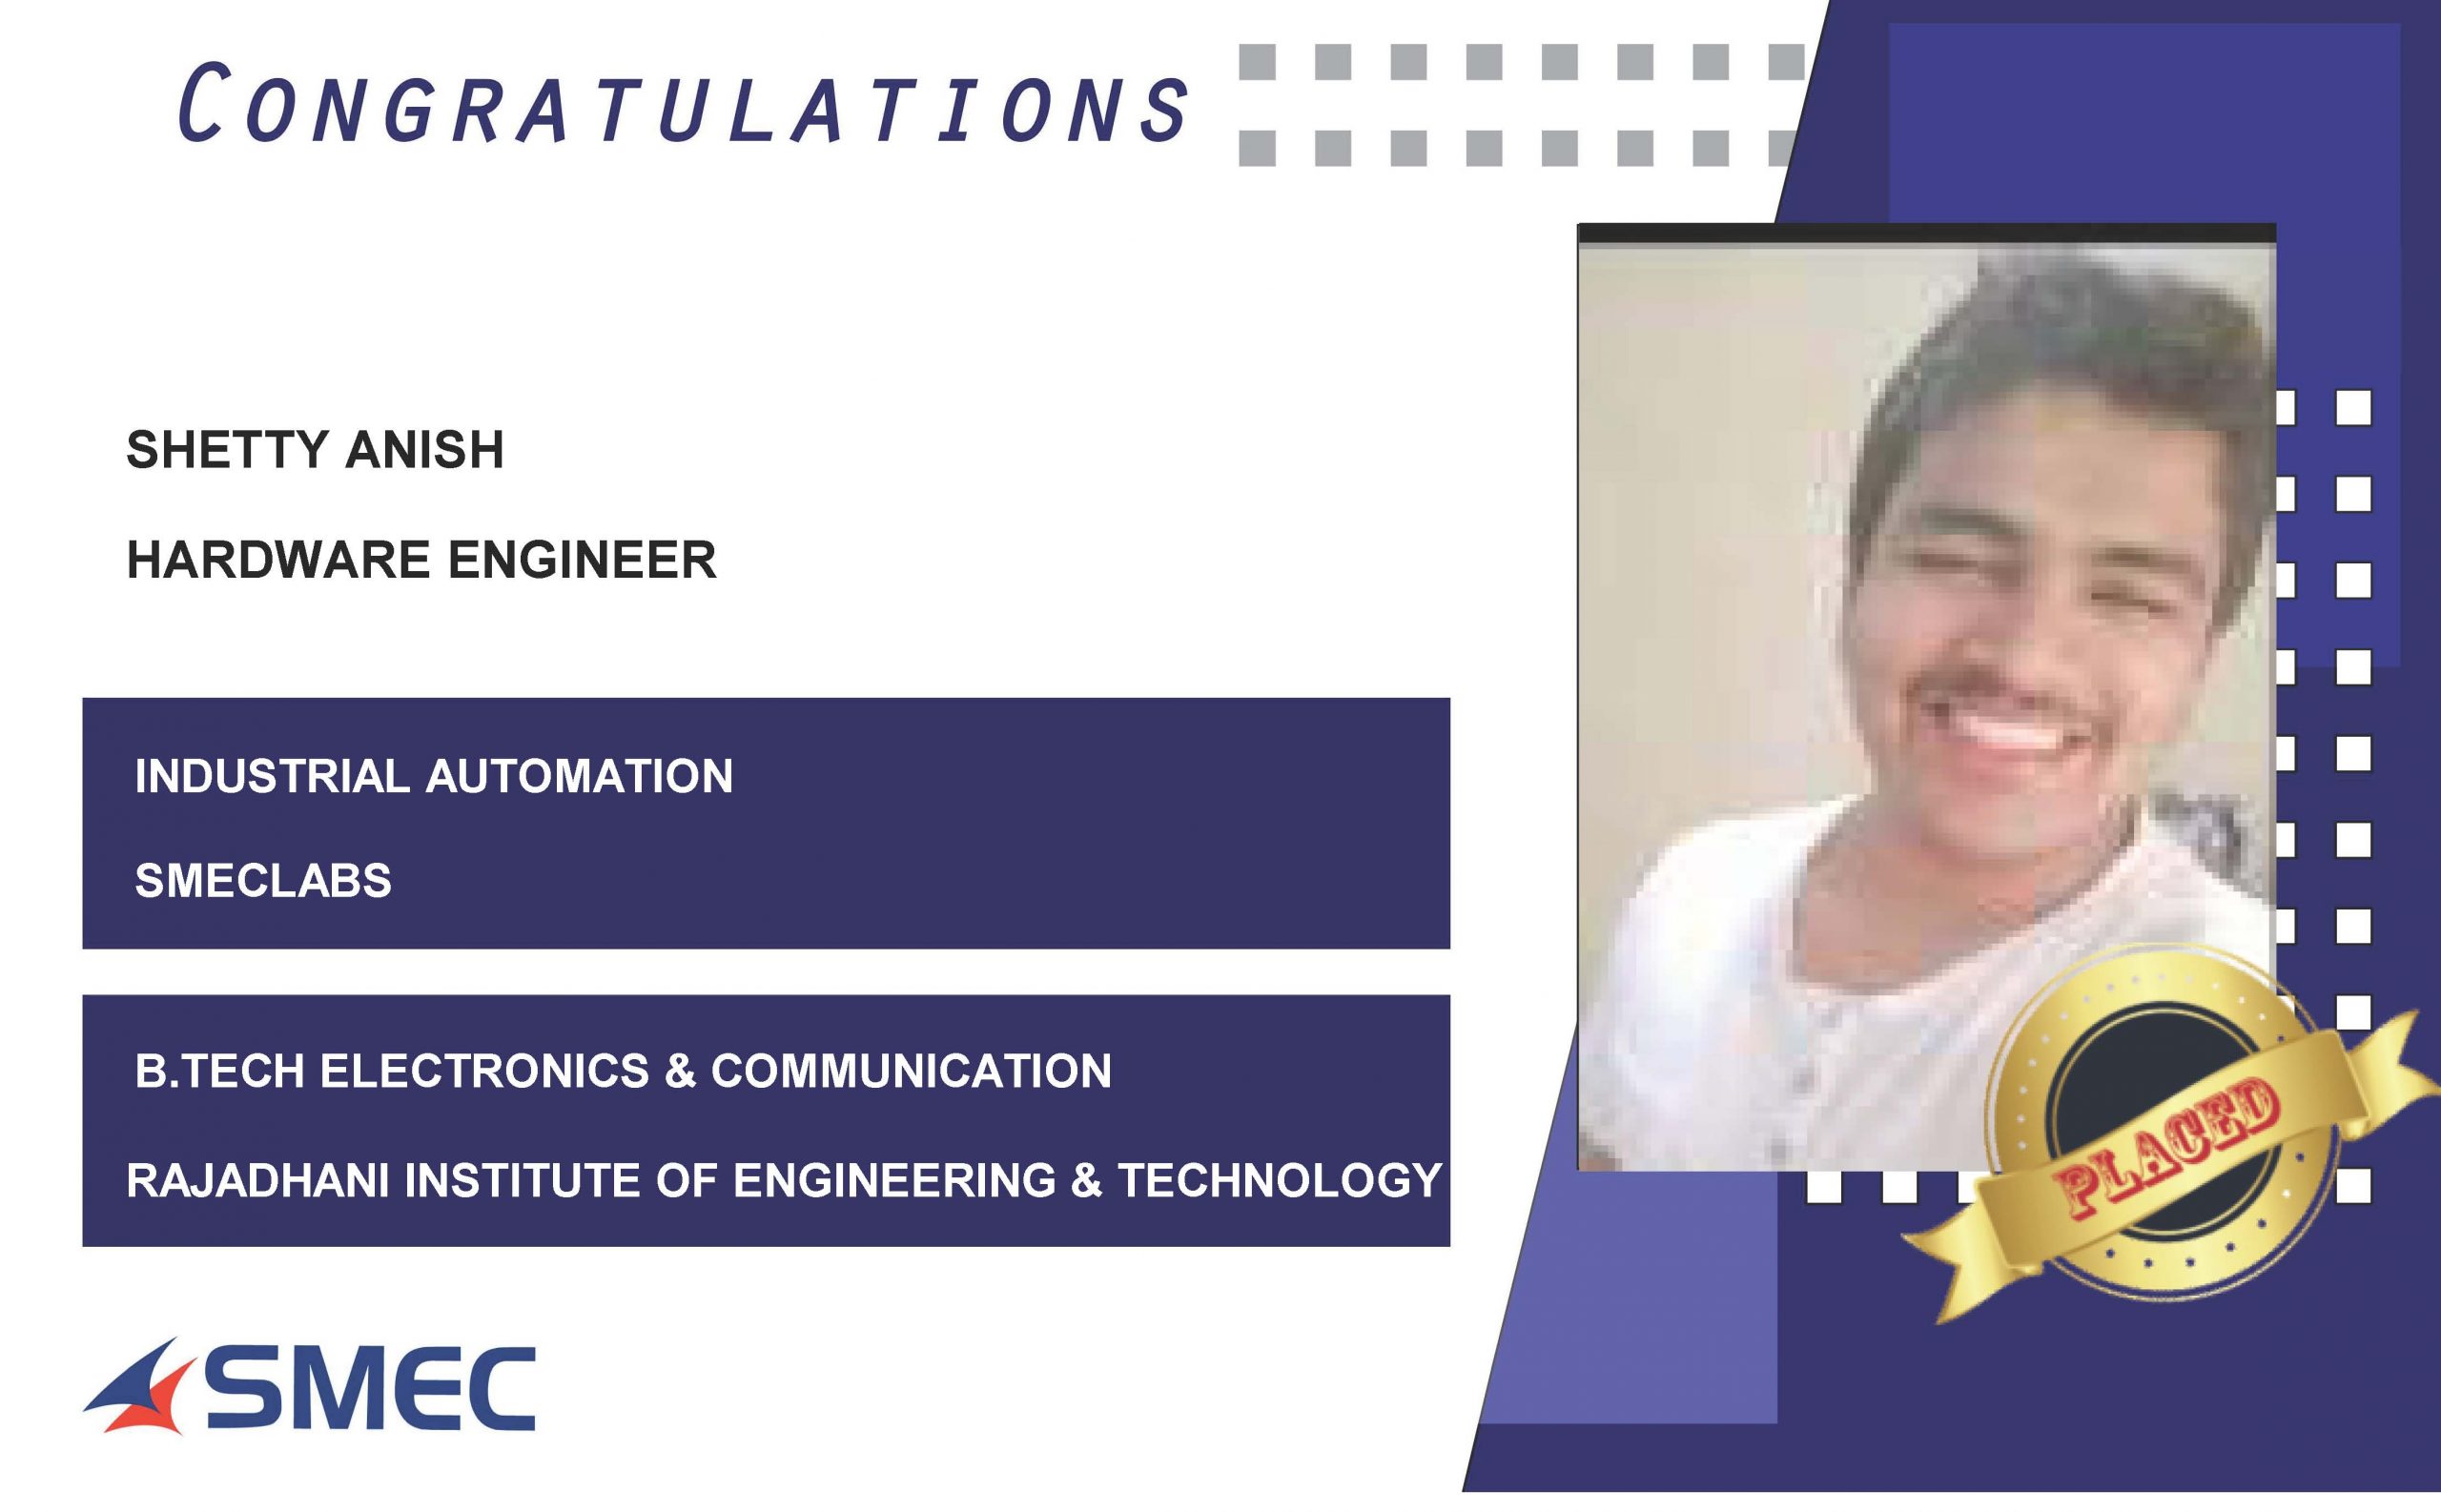 Shetty Anish Placed Successfully as Hardware Engineer